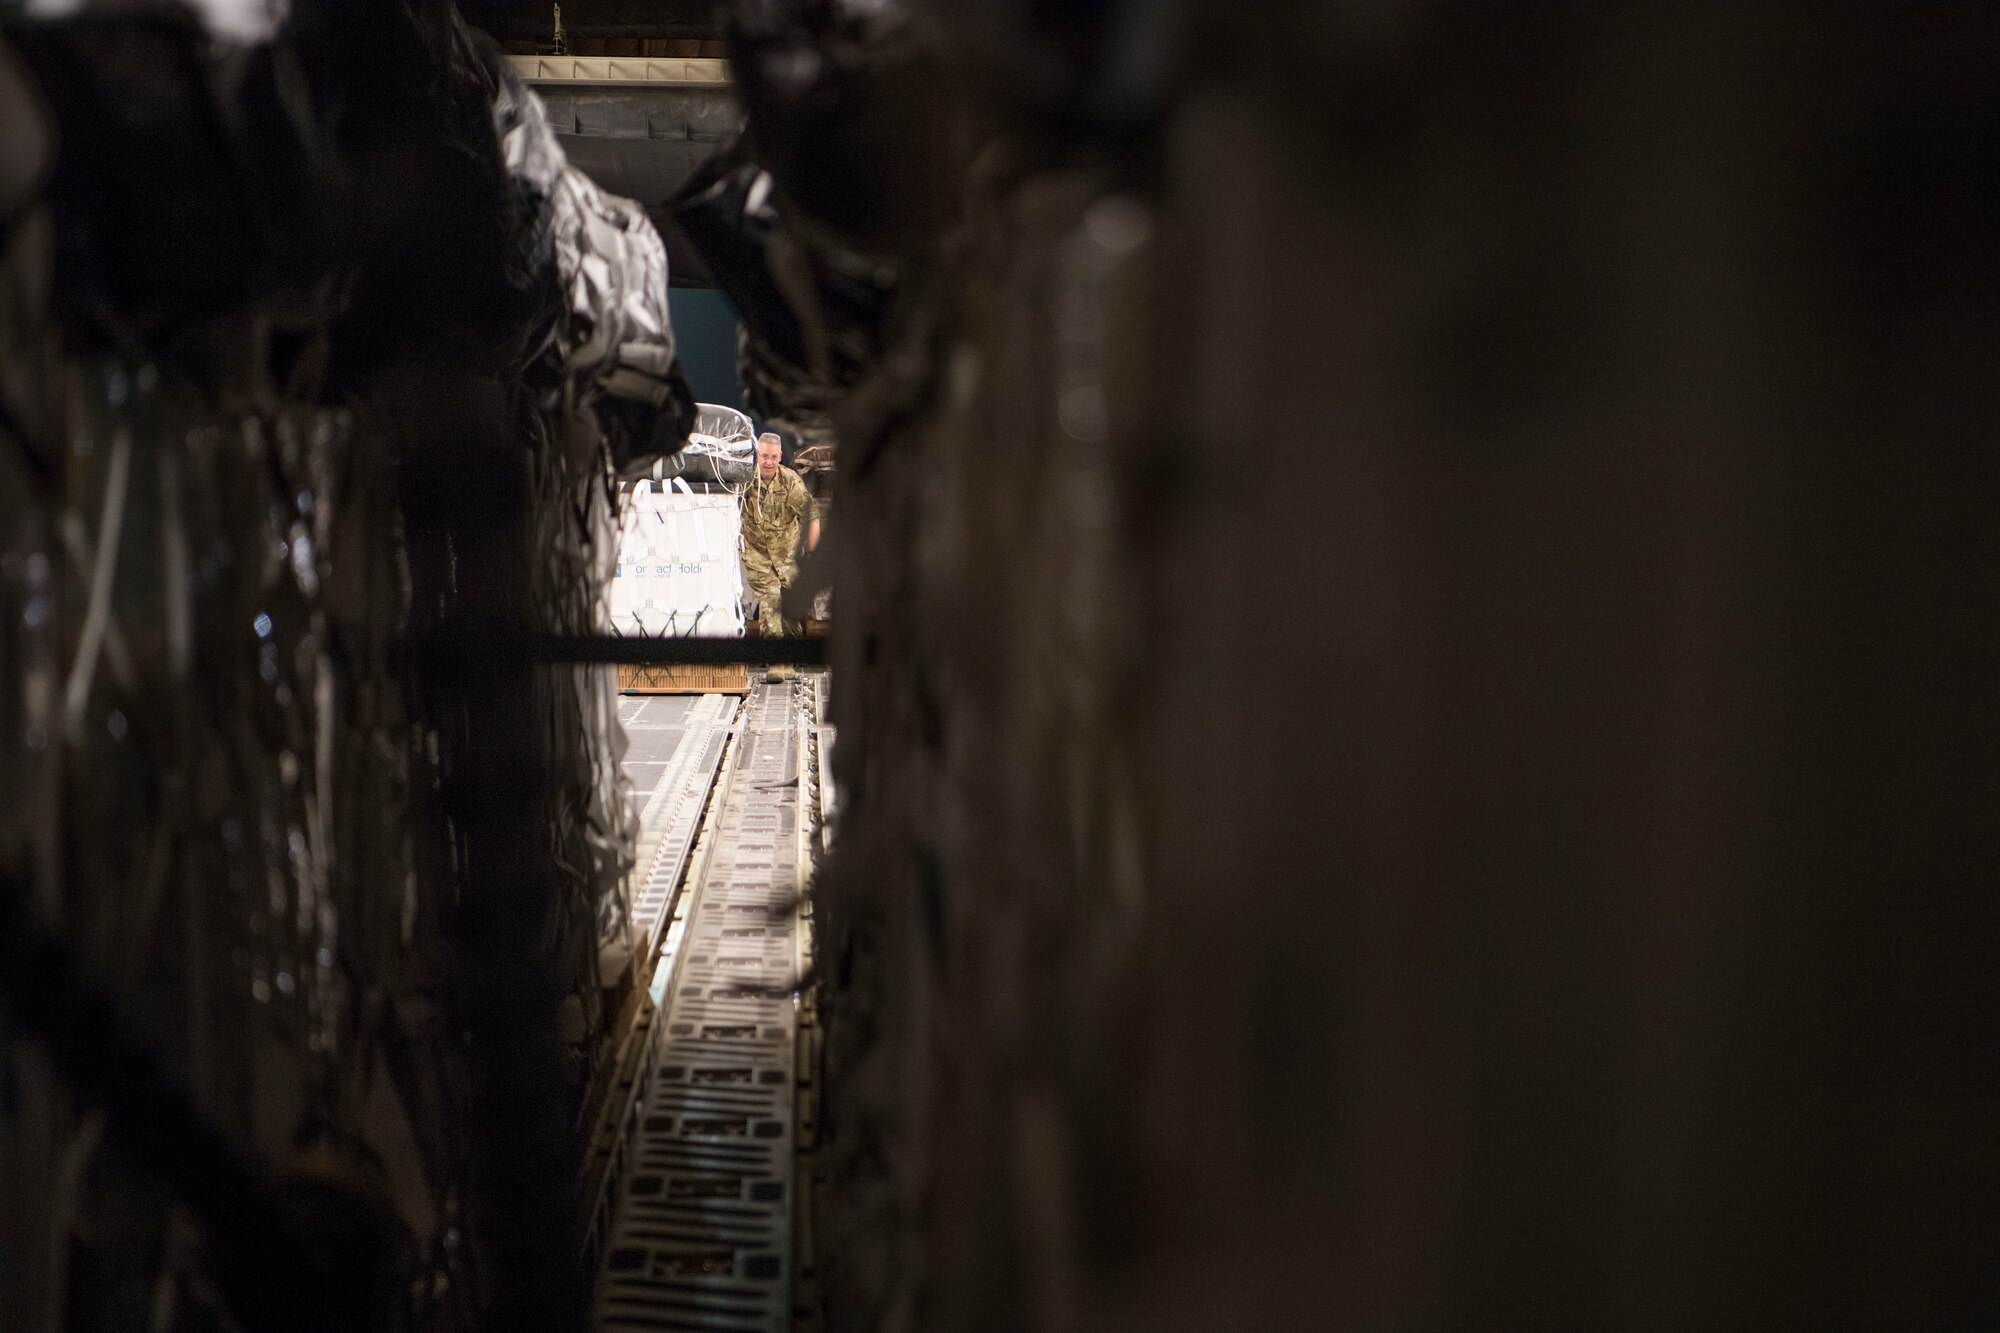 U.S. Air Force Senior Master Sgt. Davin Lammey, 816th Expeditionary Airlift Squadron superintendent, loads a container delivery system bundle onto a C-17 Globemaster III before a airdrop mission at Bagram Airfield, May 10, 2018. The primary mission of the C-17 is to provide rapid strategic delivery of troops and various types of cargo to bases throughout the U.S. Central Command area of responsibility. (U.S. Air Force photo by Staff Sgt. Keith James)